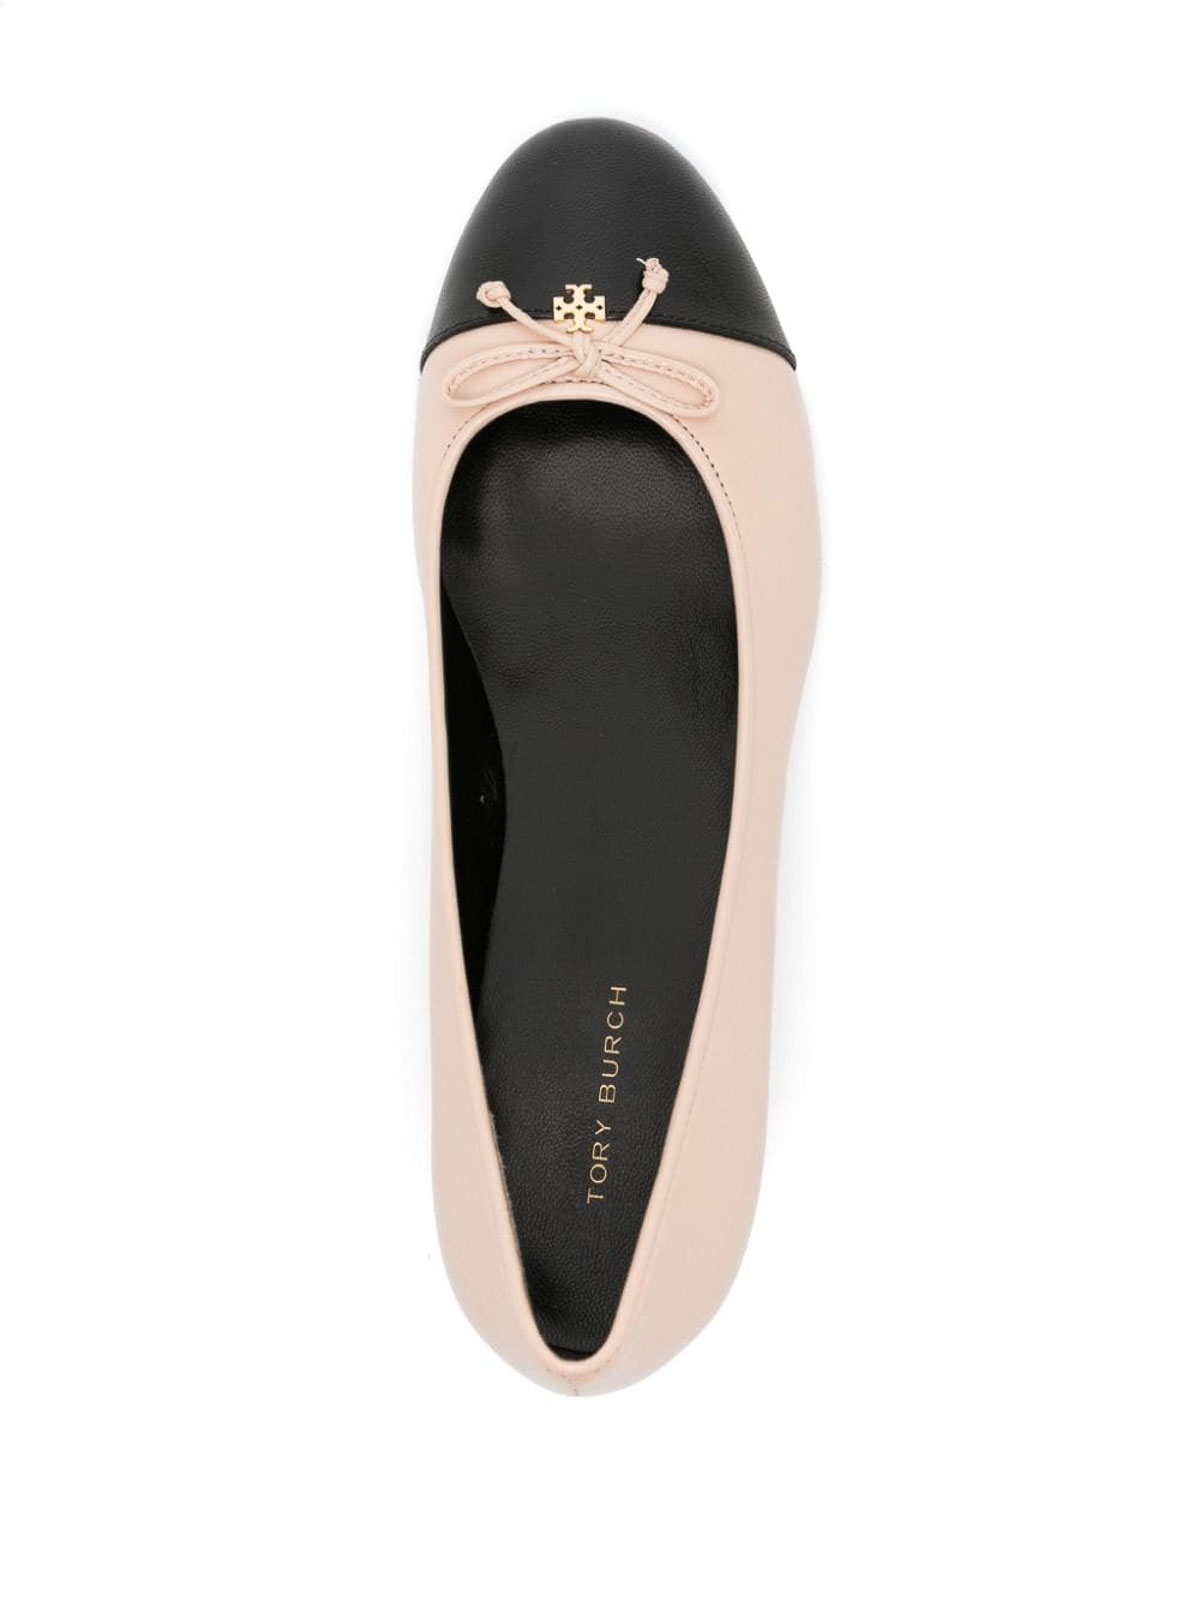 Shop Tory Burch Cap-toe Leather Pumps In Light Pink